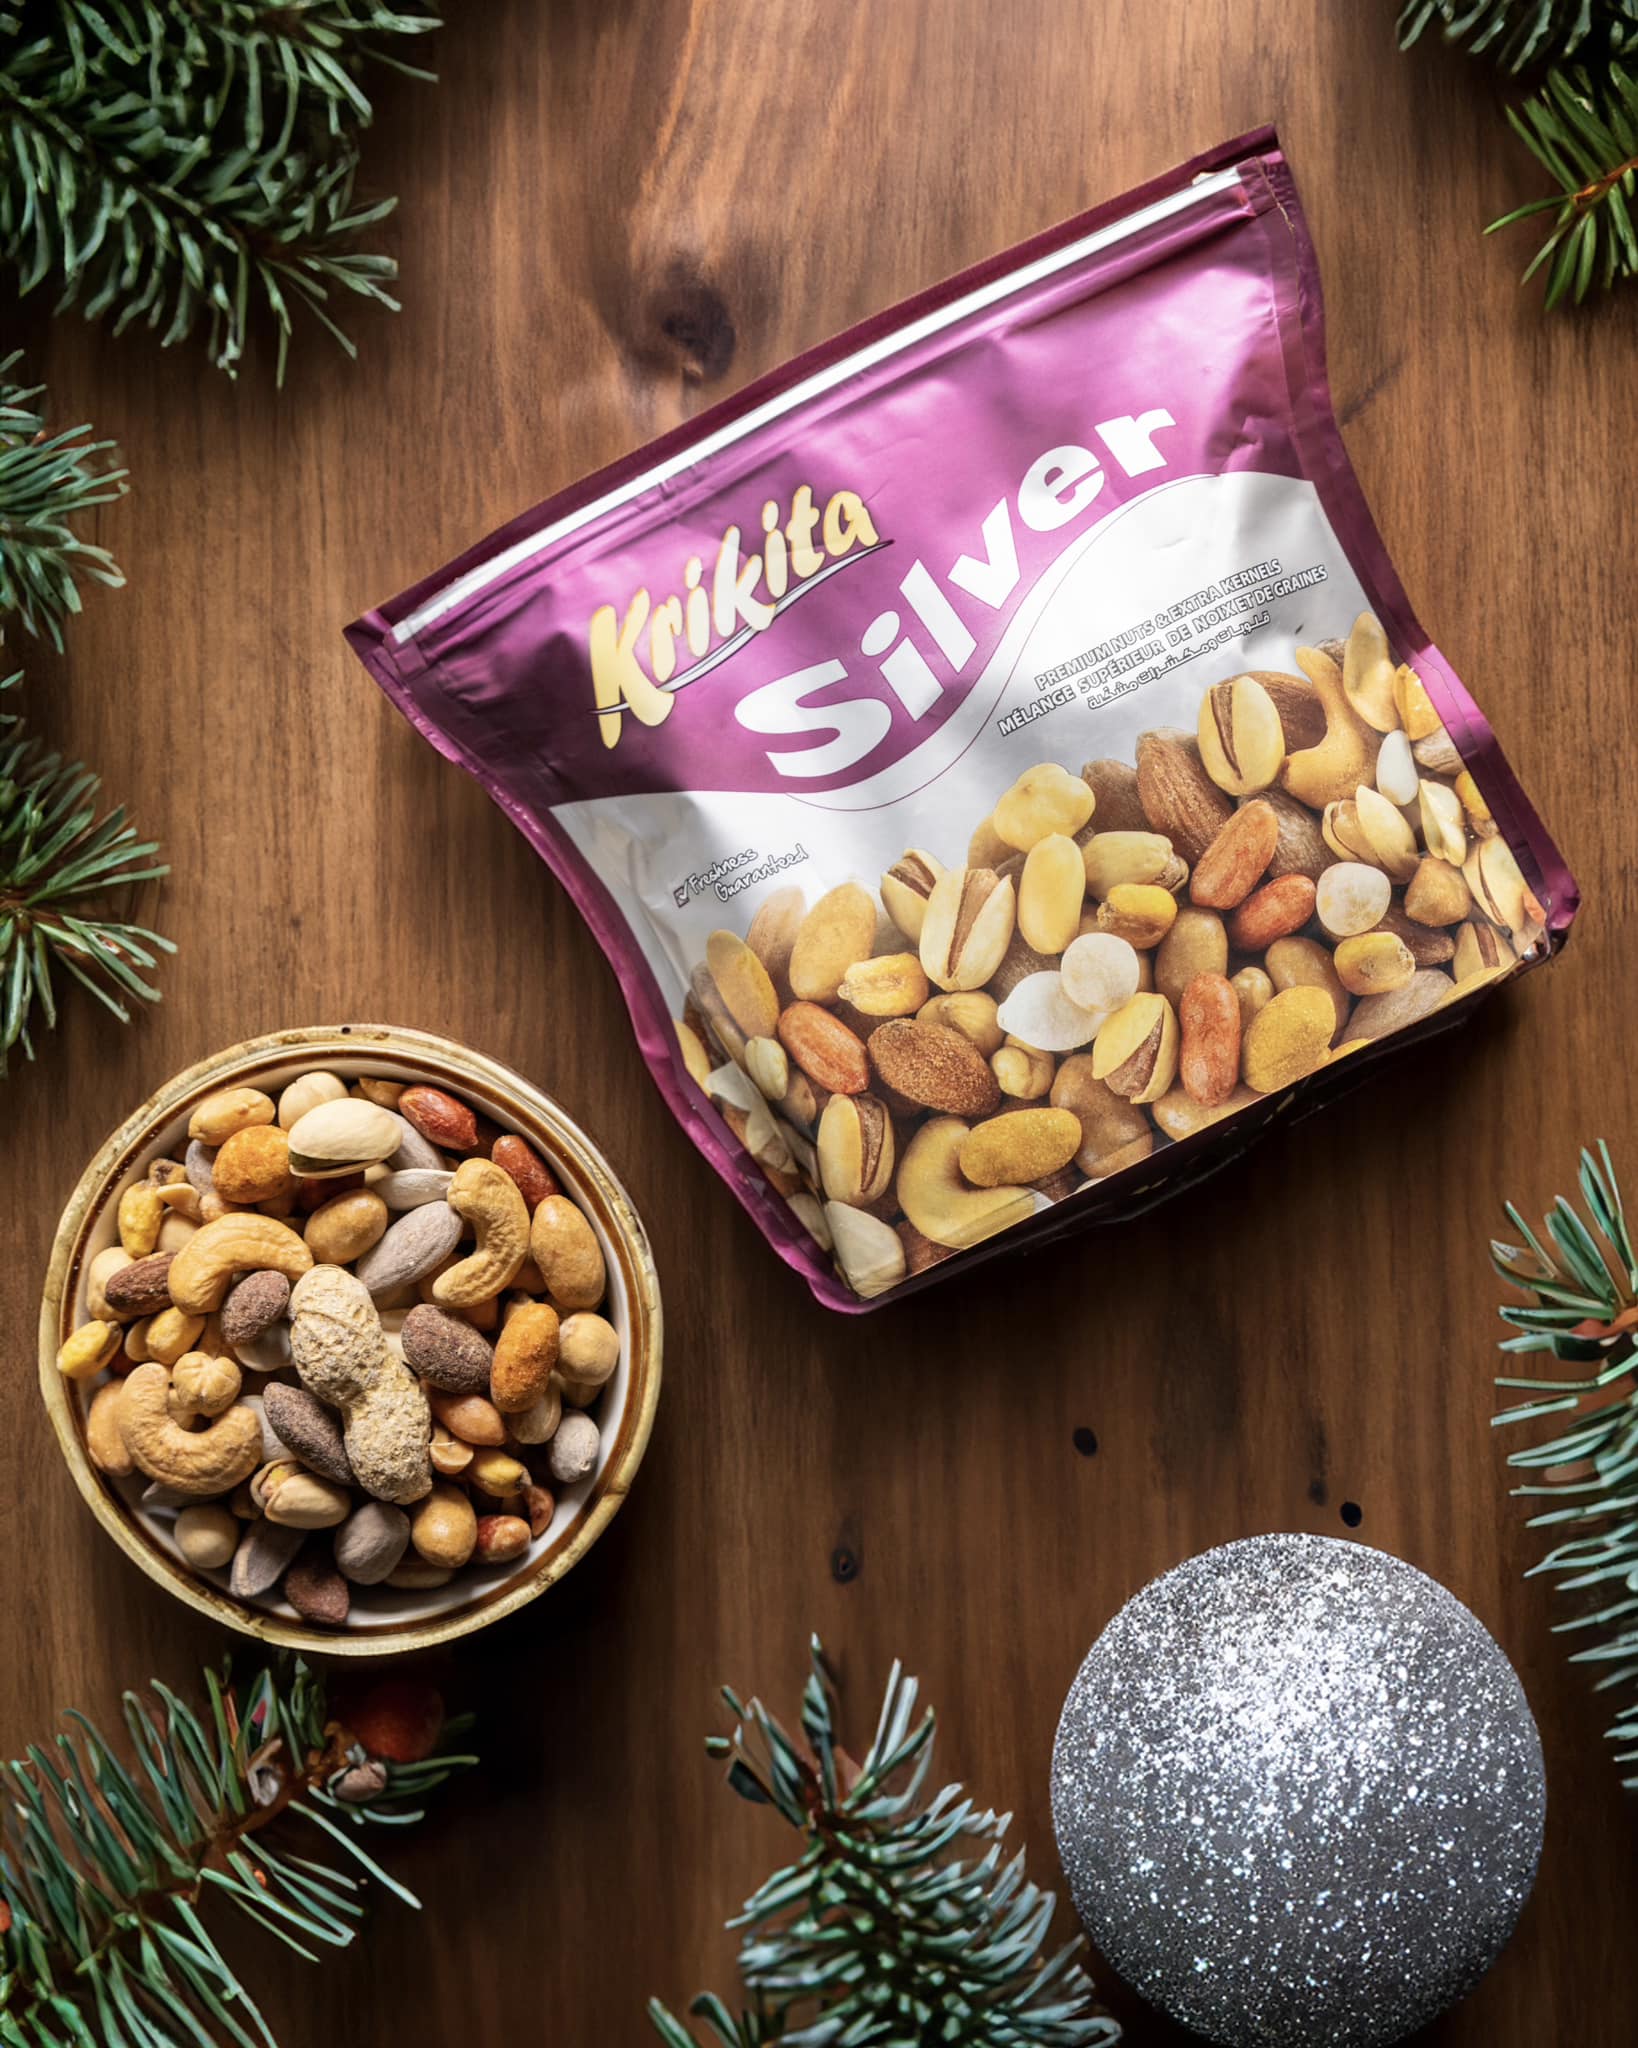 Krikita Silver Mix - Premium Nuts and Extra Kernels 300g Zip Bag - Mideast Grocers